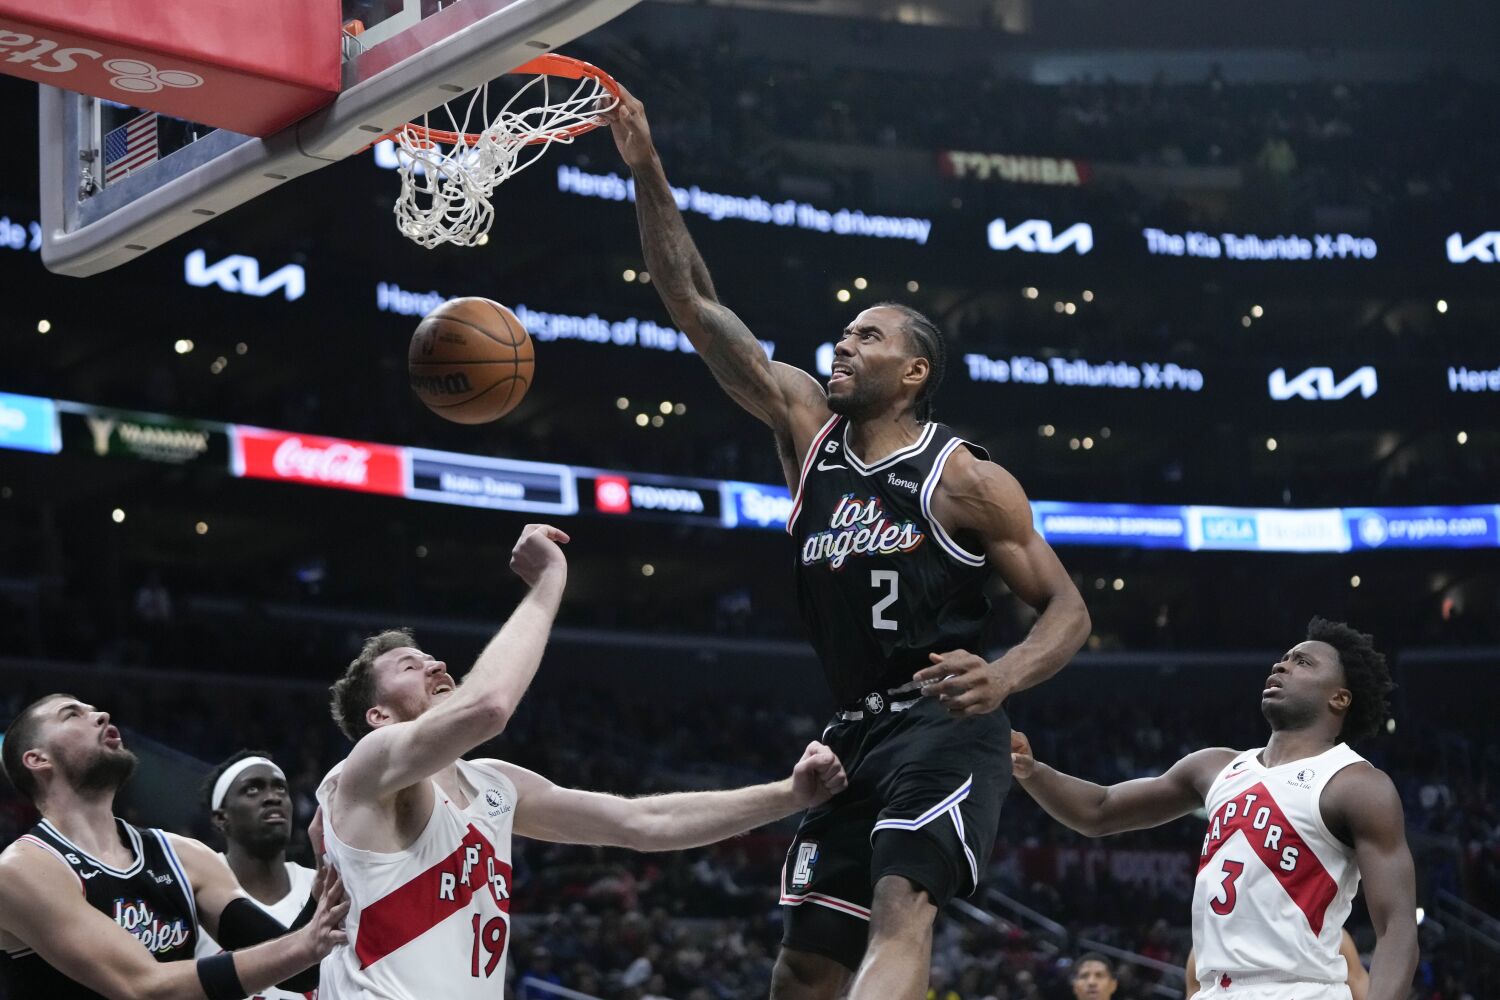 Kawhi Leonard's vicious dunks and championship-level play lift Clippers over Raptors